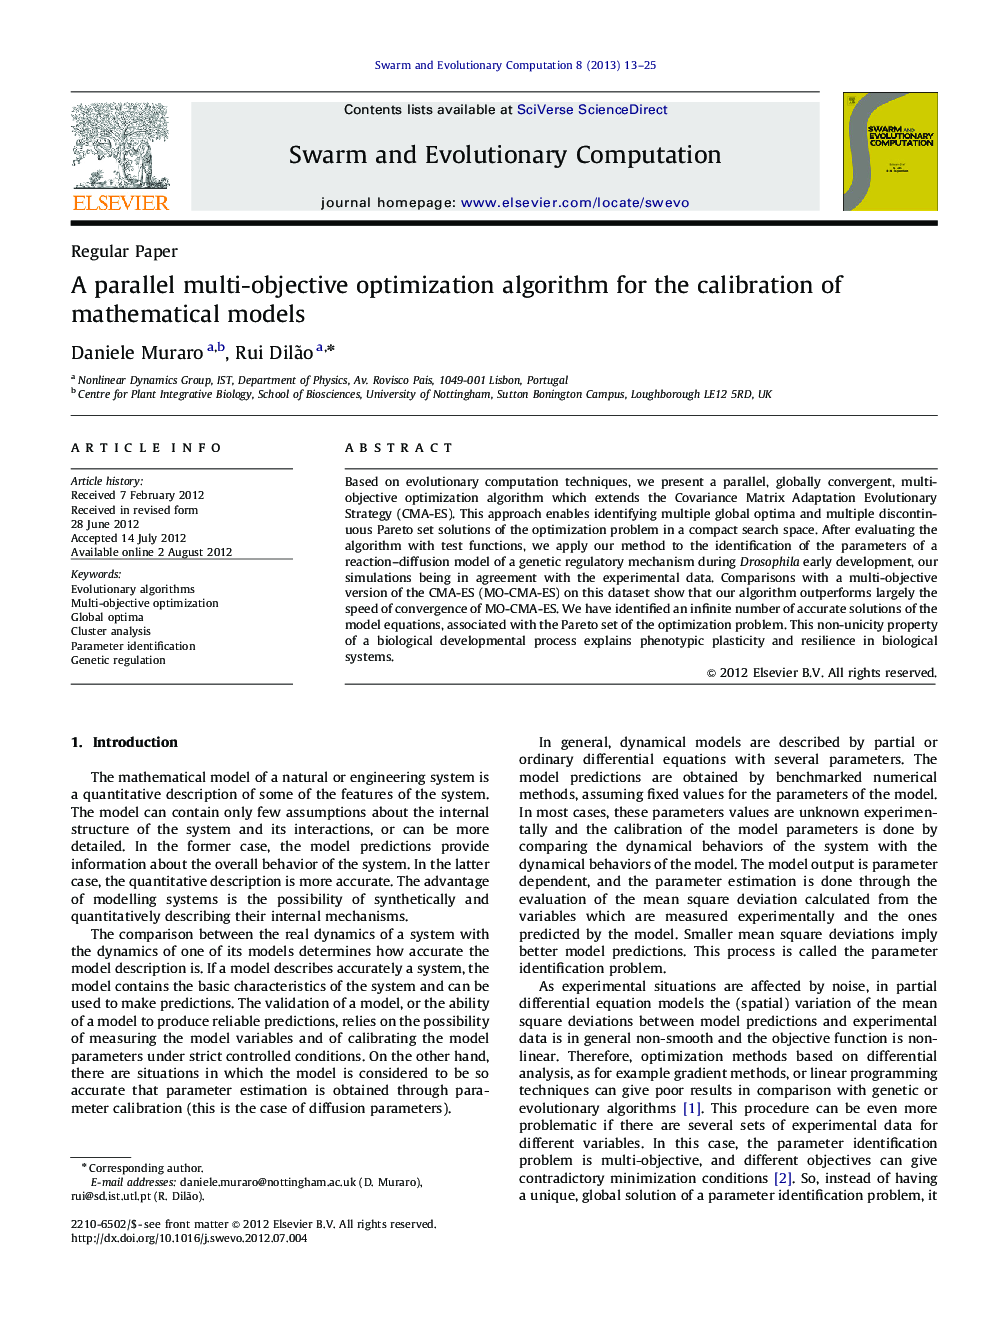 A parallel multi-objective optimization algorithm for the calibration of mathematical models